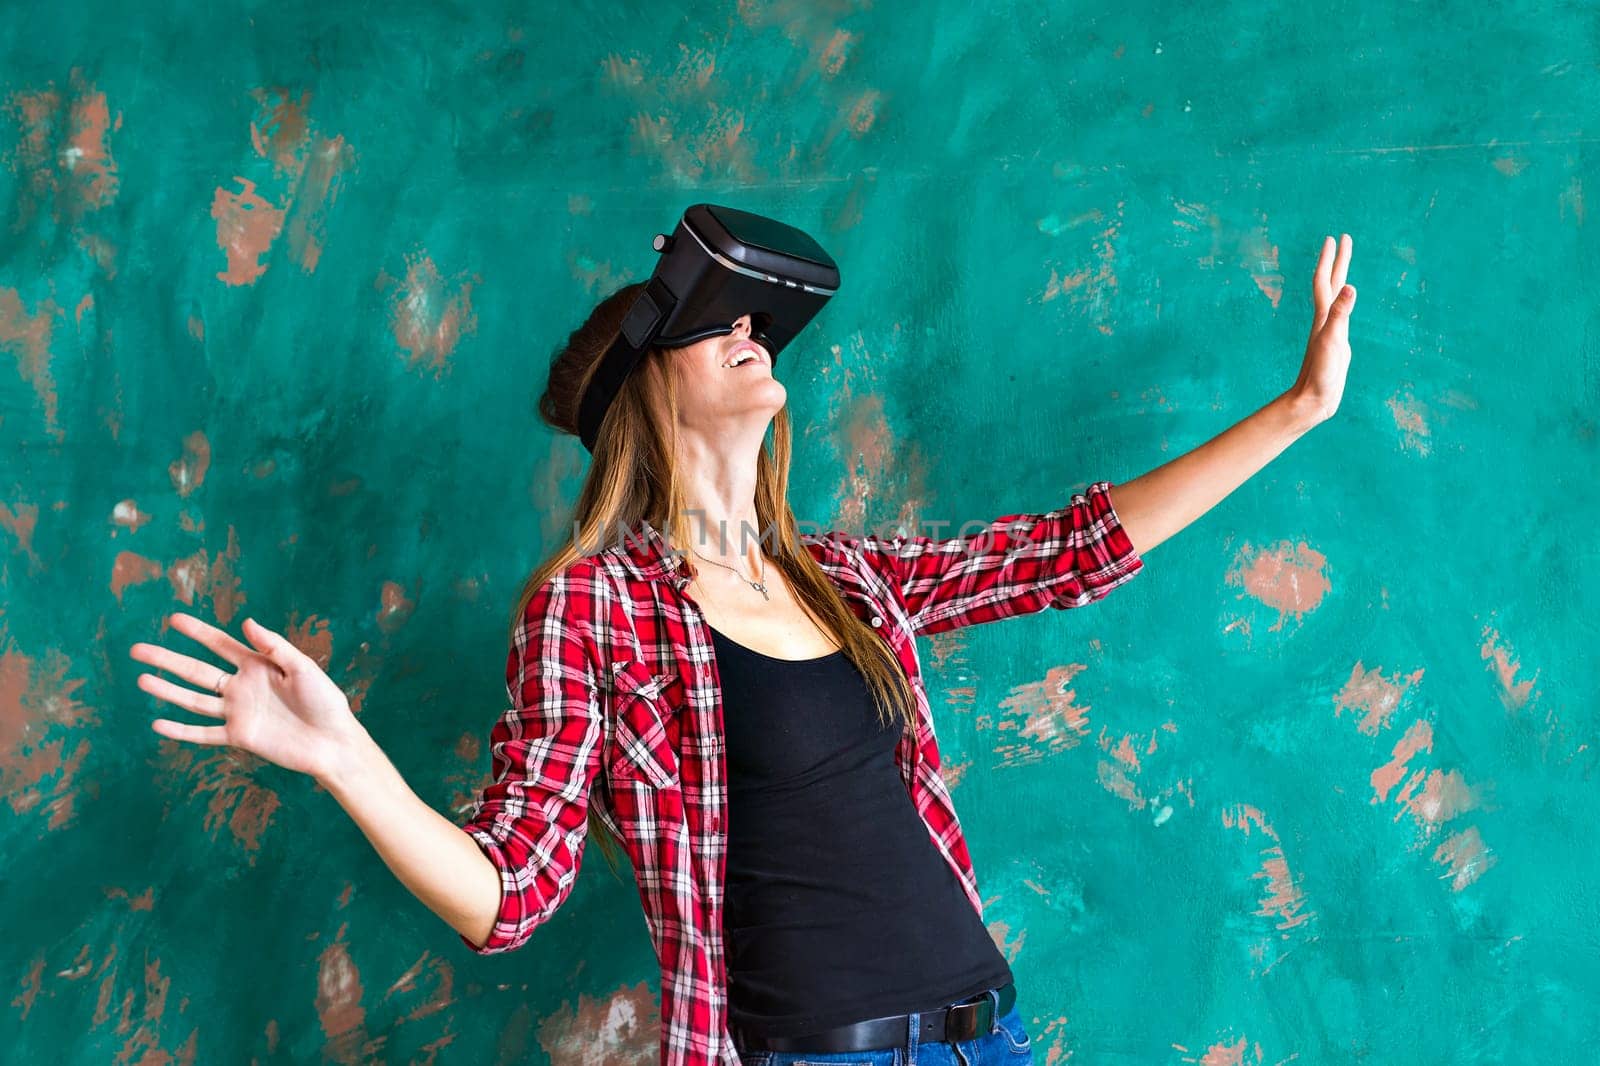 Smile happy woman getting experience using VR-headset glasses of virtual reality much gesticulating hands by Satura86